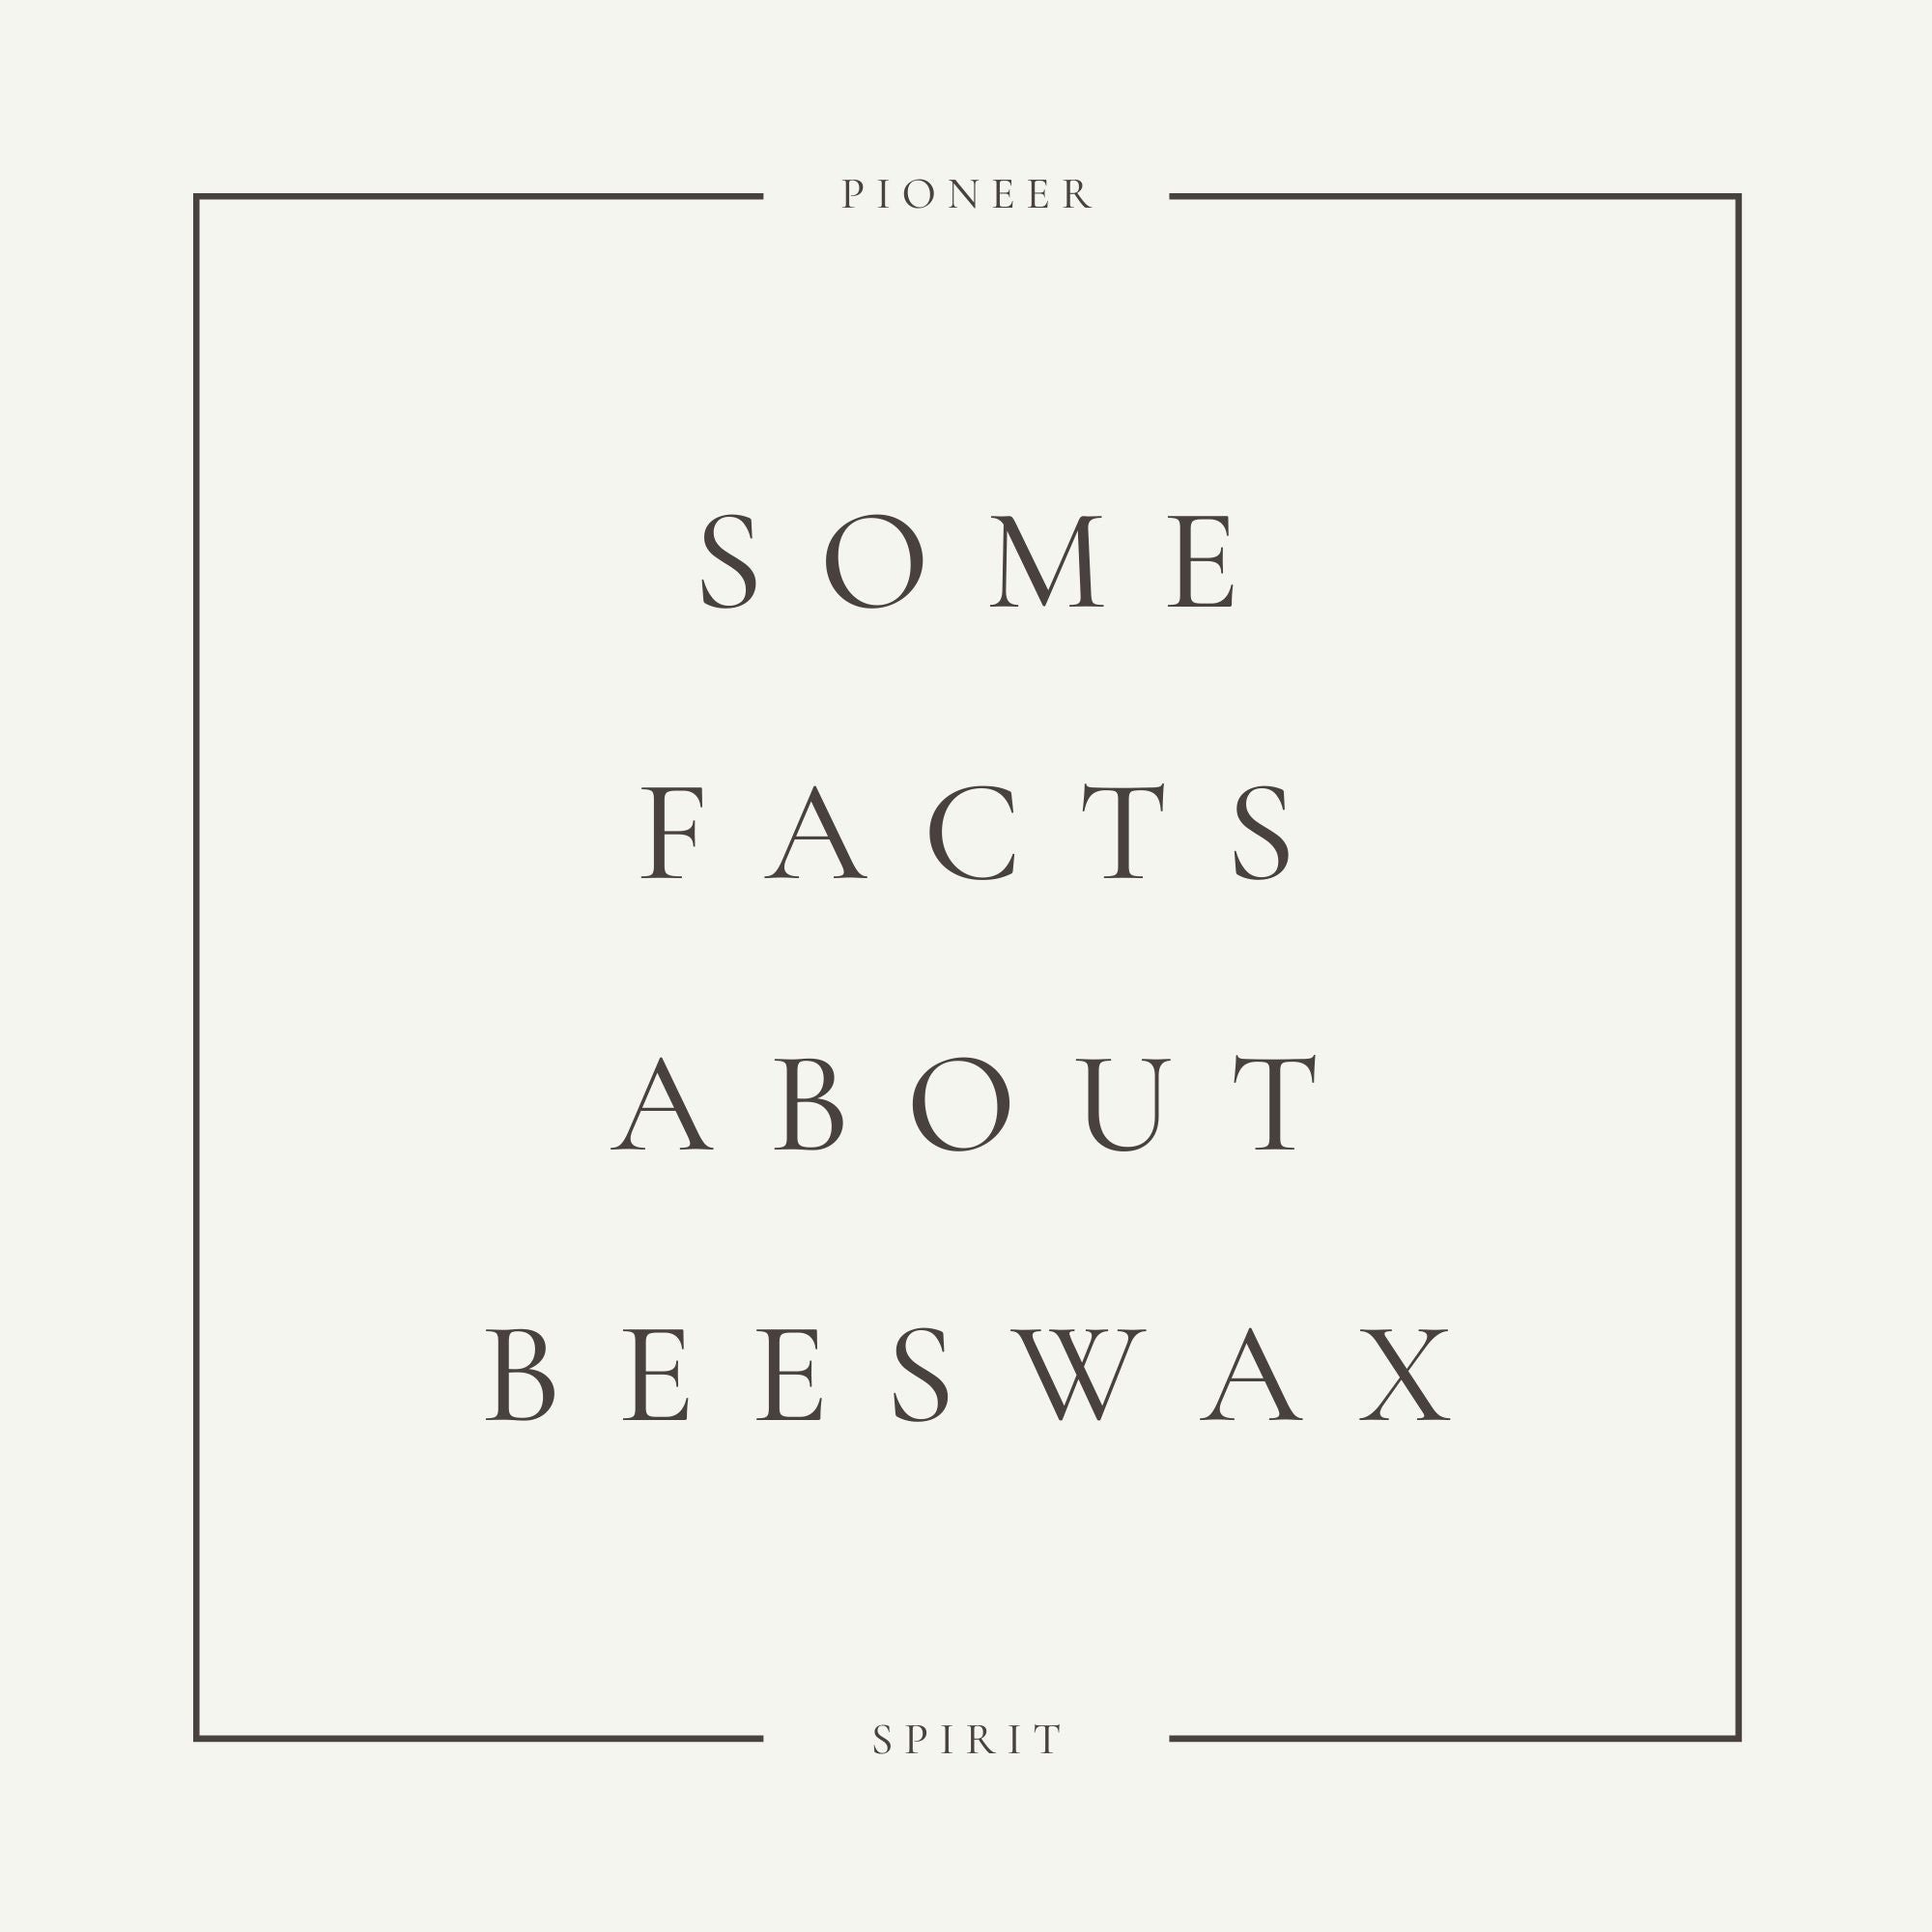 Zero Waste Bali - Did you know that beeswax works like a magic for your  hair? 😍 There are lots of benefits of beeswax we are not aware of. Not  only is